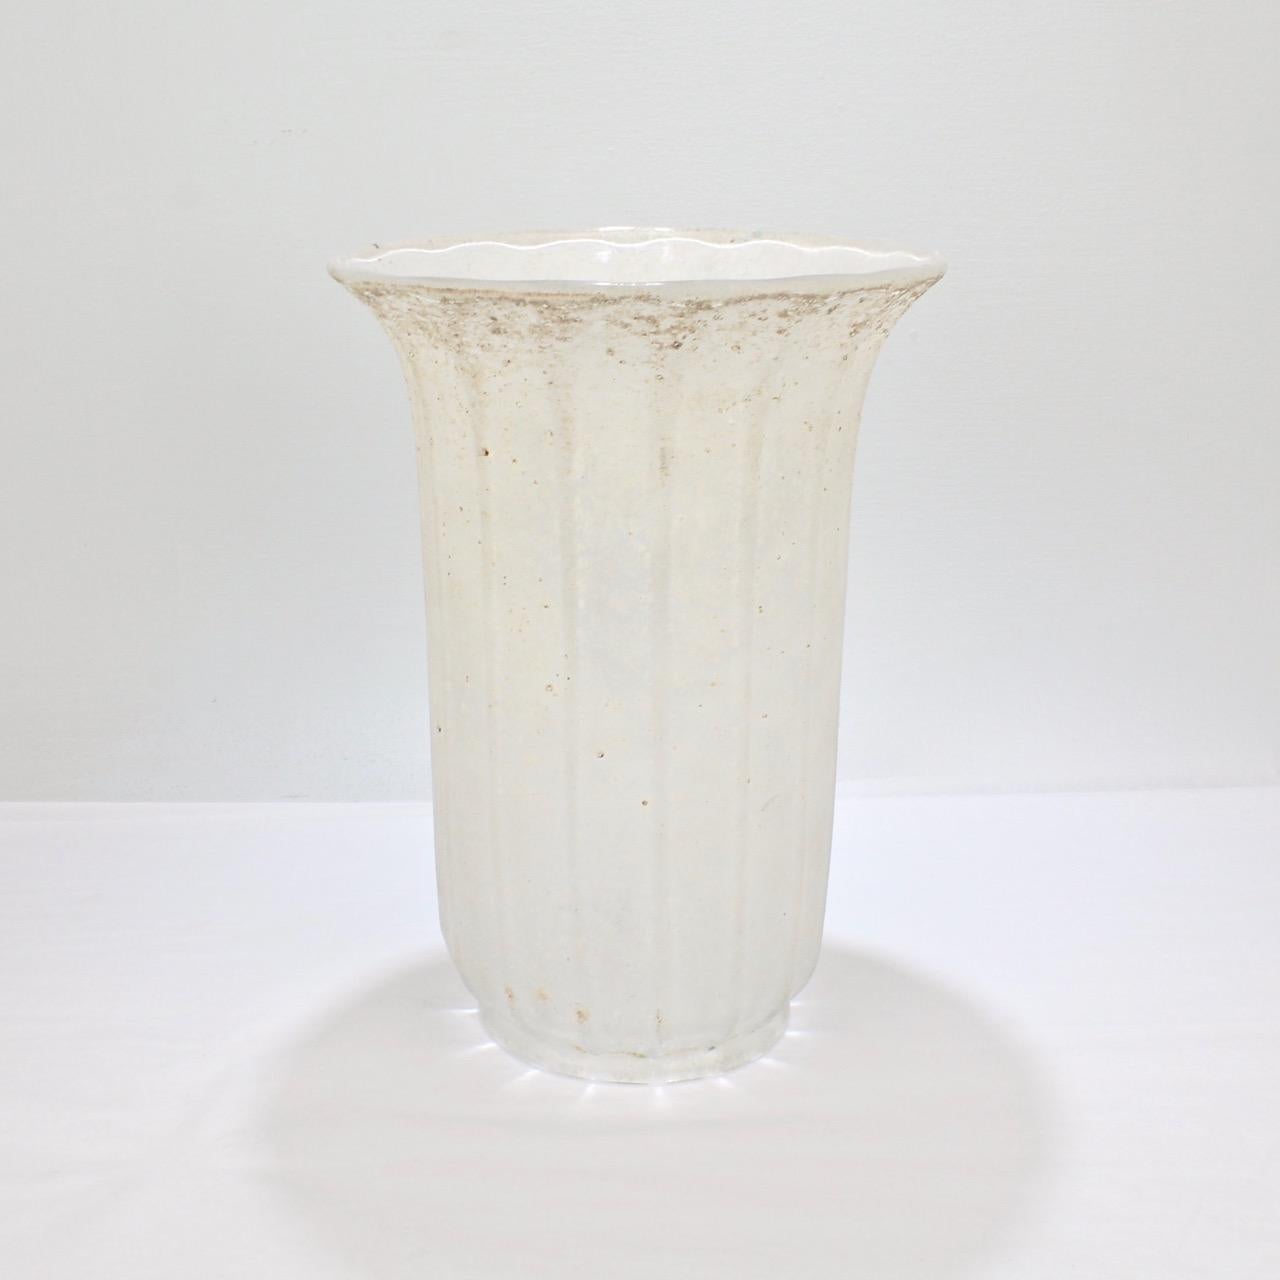 A large, Italian white art-glass vase in the 'scavo' technique. 

Attributed to Archimede Seguso and Seguso Vetri d’Arte.

The white textured finish of the vase offers a perfect compliment to warm-toned woods and surfaces painted with saturated